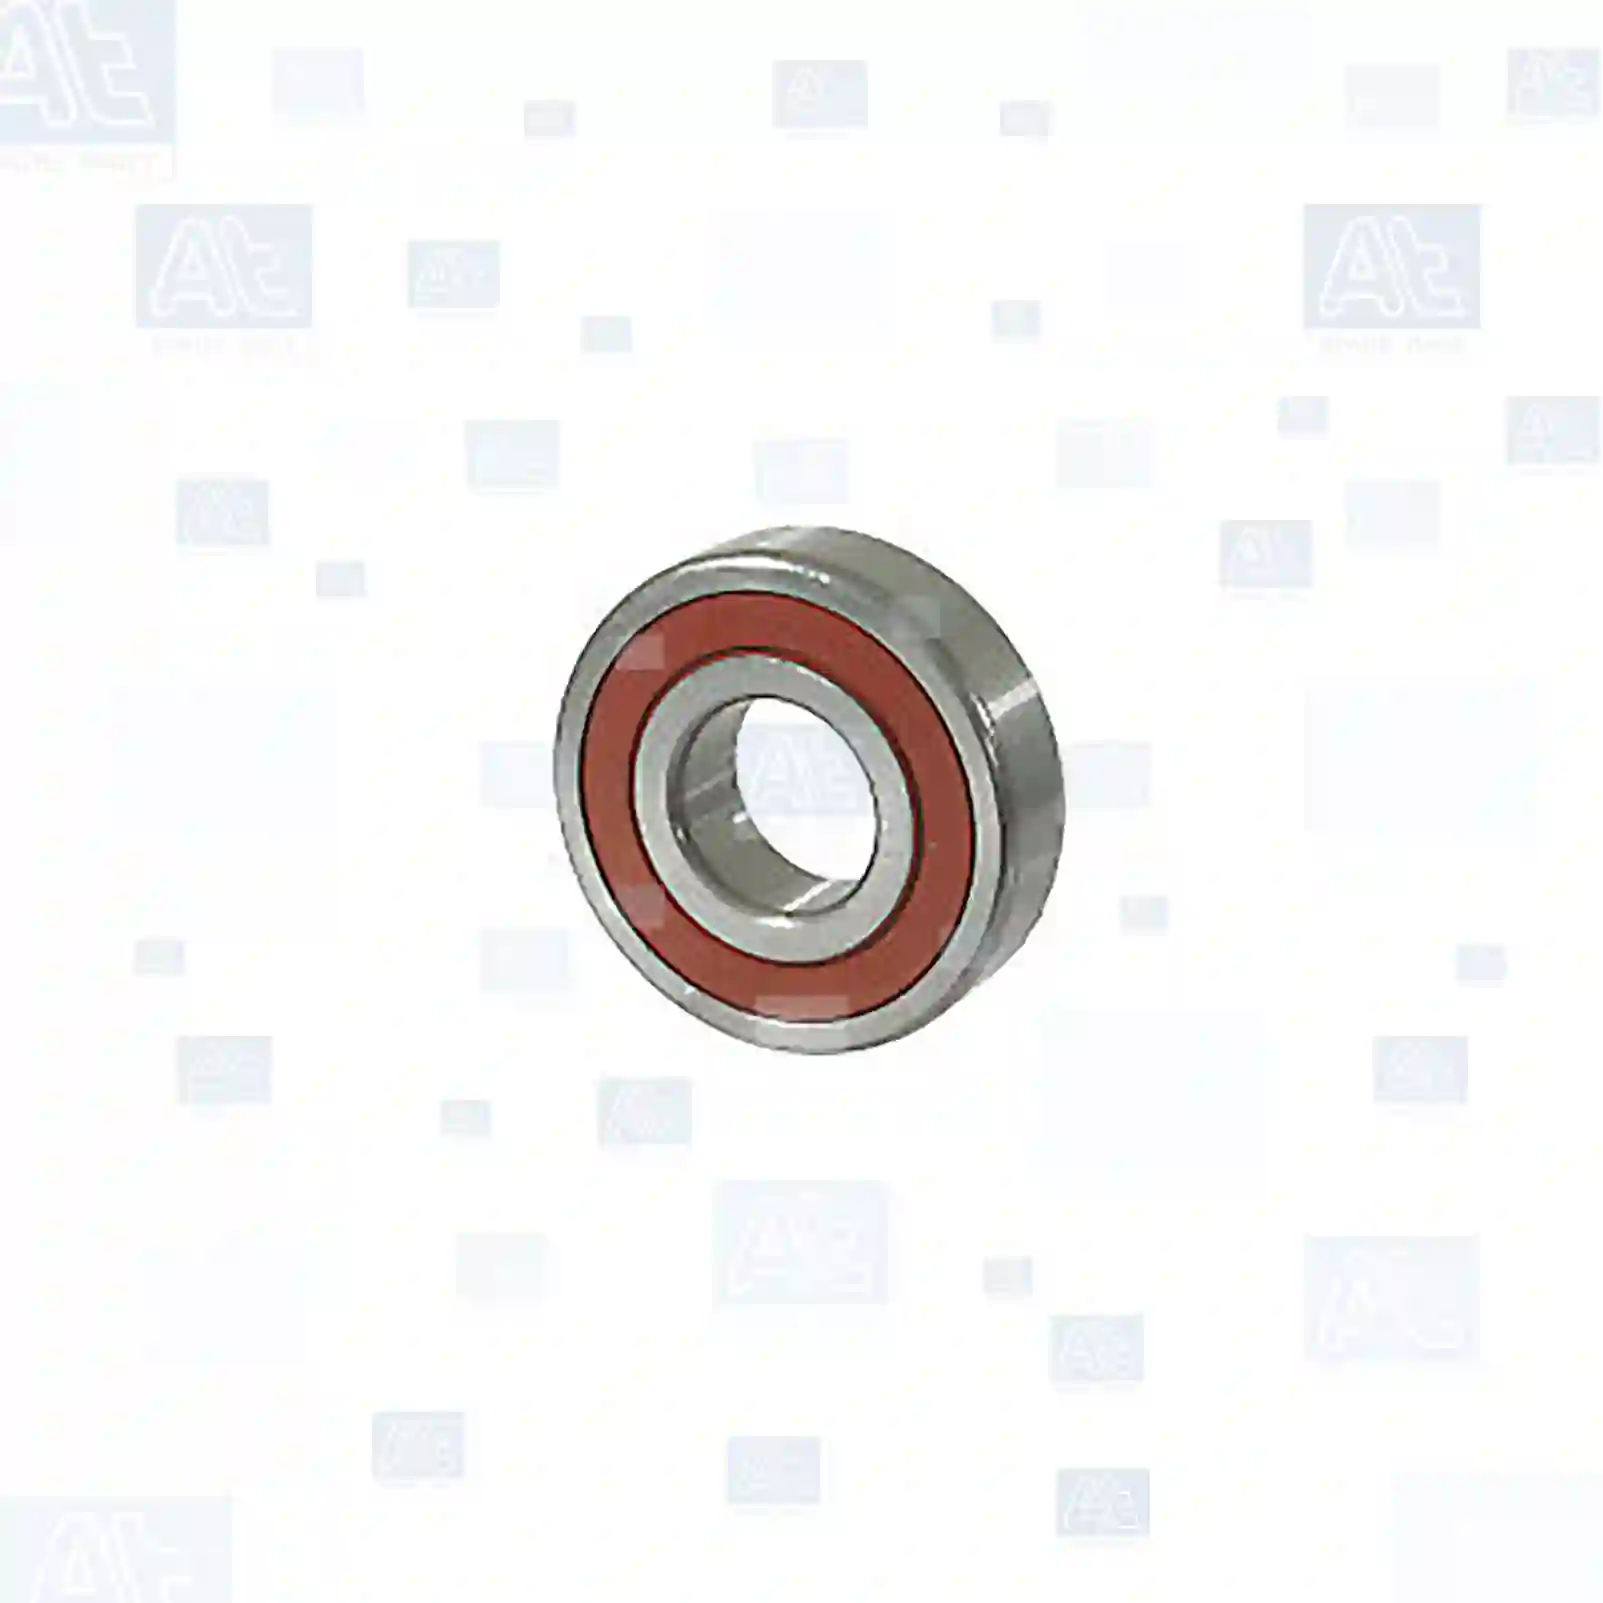 Ball bearing, at no 77710270, oem no: 1276434, 1376955, 68091, 01905280, 01905473, 07075306, 09935795, 09941754, 09960113, 09986035, 24941650, 60735995, 60751645, 60752009, 75207748, 82355484, 01905280, 01905473, 06314505902, 51934100129, 0029819025, 0049813425, 0059811925, 0059812005, 0059812025, 0059813325, 0089811225, 0089814625, 0089815825, 5000805018, 5001831953, 5001831956, 5001836335, 1314205, 1387613, 1422686, 1953794, 305156, 11705744, 12709022, 12709027, 1376955, 244328, 6889262, 694068, 85100098, 049903221A, 049903221C, 049903221F At Spare Part | Engine, Accelerator Pedal, Camshaft, Connecting Rod, Crankcase, Crankshaft, Cylinder Head, Engine Suspension Mountings, Exhaust Manifold, Exhaust Gas Recirculation, Filter Kits, Flywheel Housing, General Overhaul Kits, Engine, Intake Manifold, Oil Cleaner, Oil Cooler, Oil Filter, Oil Pump, Oil Sump, Piston & Liner, Sensor & Switch, Timing Case, Turbocharger, Cooling System, Belt Tensioner, Coolant Filter, Coolant Pipe, Corrosion Prevention Agent, Drive, Expansion Tank, Fan, Intercooler, Monitors & Gauges, Radiator, Thermostat, V-Belt / Timing belt, Water Pump, Fuel System, Electronical Injector Unit, Feed Pump, Fuel Filter, cpl., Fuel Gauge Sender,  Fuel Line, Fuel Pump, Fuel Tank, Injection Line Kit, Injection Pump, Exhaust System, Clutch & Pedal, Gearbox, Propeller Shaft, Axles, Brake System, Hubs & Wheels, Suspension, Leaf Spring, Universal Parts / Accessories, Steering, Electrical System, Cabin Ball bearing, at no 77710270, oem no: 1276434, 1376955, 68091, 01905280, 01905473, 07075306, 09935795, 09941754, 09960113, 09986035, 24941650, 60735995, 60751645, 60752009, 75207748, 82355484, 01905280, 01905473, 06314505902, 51934100129, 0029819025, 0049813425, 0059811925, 0059812005, 0059812025, 0059813325, 0089811225, 0089814625, 0089815825, 5000805018, 5001831953, 5001831956, 5001836335, 1314205, 1387613, 1422686, 1953794, 305156, 11705744, 12709022, 12709027, 1376955, 244328, 6889262, 694068, 85100098, 049903221A, 049903221C, 049903221F At Spare Part | Engine, Accelerator Pedal, Camshaft, Connecting Rod, Crankcase, Crankshaft, Cylinder Head, Engine Suspension Mountings, Exhaust Manifold, Exhaust Gas Recirculation, Filter Kits, Flywheel Housing, General Overhaul Kits, Engine, Intake Manifold, Oil Cleaner, Oil Cooler, Oil Filter, Oil Pump, Oil Sump, Piston & Liner, Sensor & Switch, Timing Case, Turbocharger, Cooling System, Belt Tensioner, Coolant Filter, Coolant Pipe, Corrosion Prevention Agent, Drive, Expansion Tank, Fan, Intercooler, Monitors & Gauges, Radiator, Thermostat, V-Belt / Timing belt, Water Pump, Fuel System, Electronical Injector Unit, Feed Pump, Fuel Filter, cpl., Fuel Gauge Sender,  Fuel Line, Fuel Pump, Fuel Tank, Injection Line Kit, Injection Pump, Exhaust System, Clutch & Pedal, Gearbox, Propeller Shaft, Axles, Brake System, Hubs & Wheels, Suspension, Leaf Spring, Universal Parts / Accessories, Steering, Electrical System, Cabin